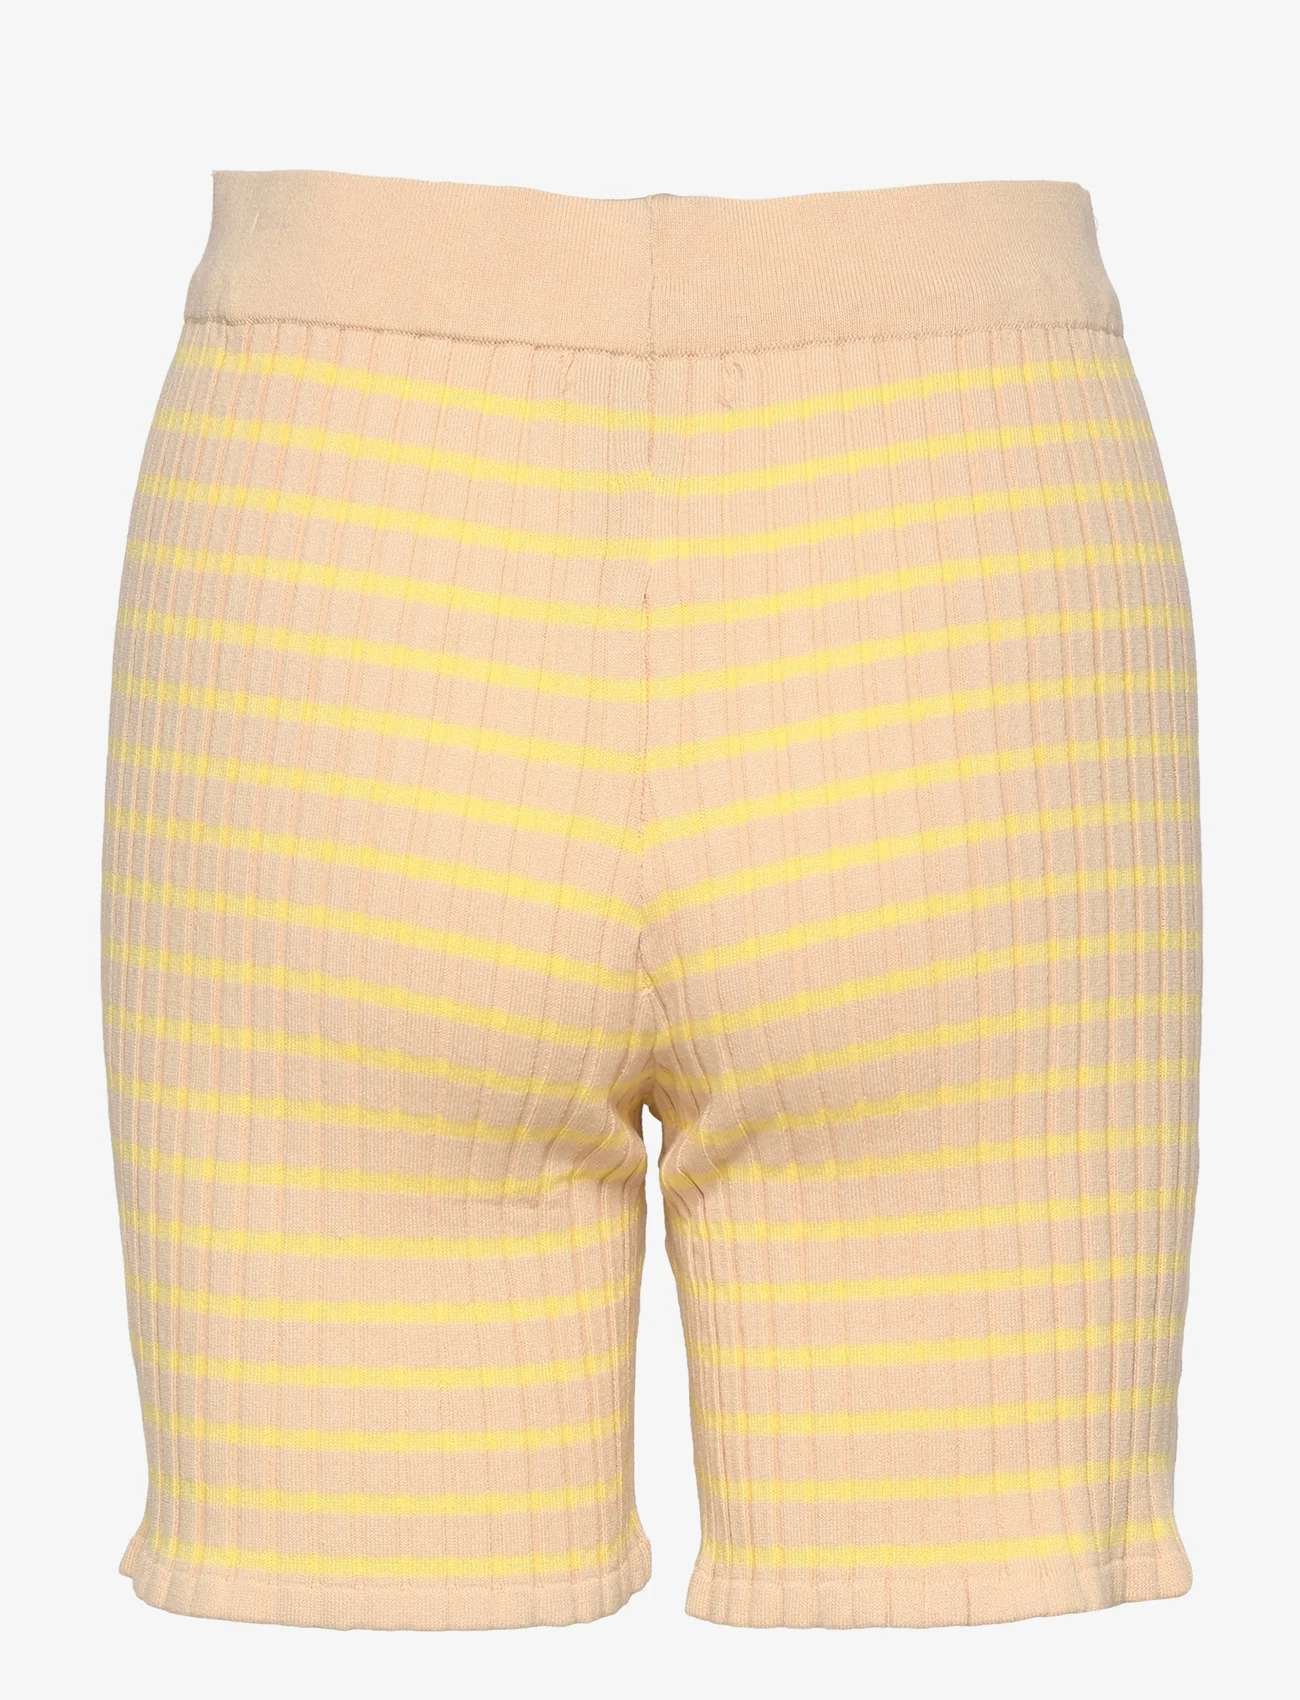 A-View - Sira shorts - casual shorts - beige/yellow - 1